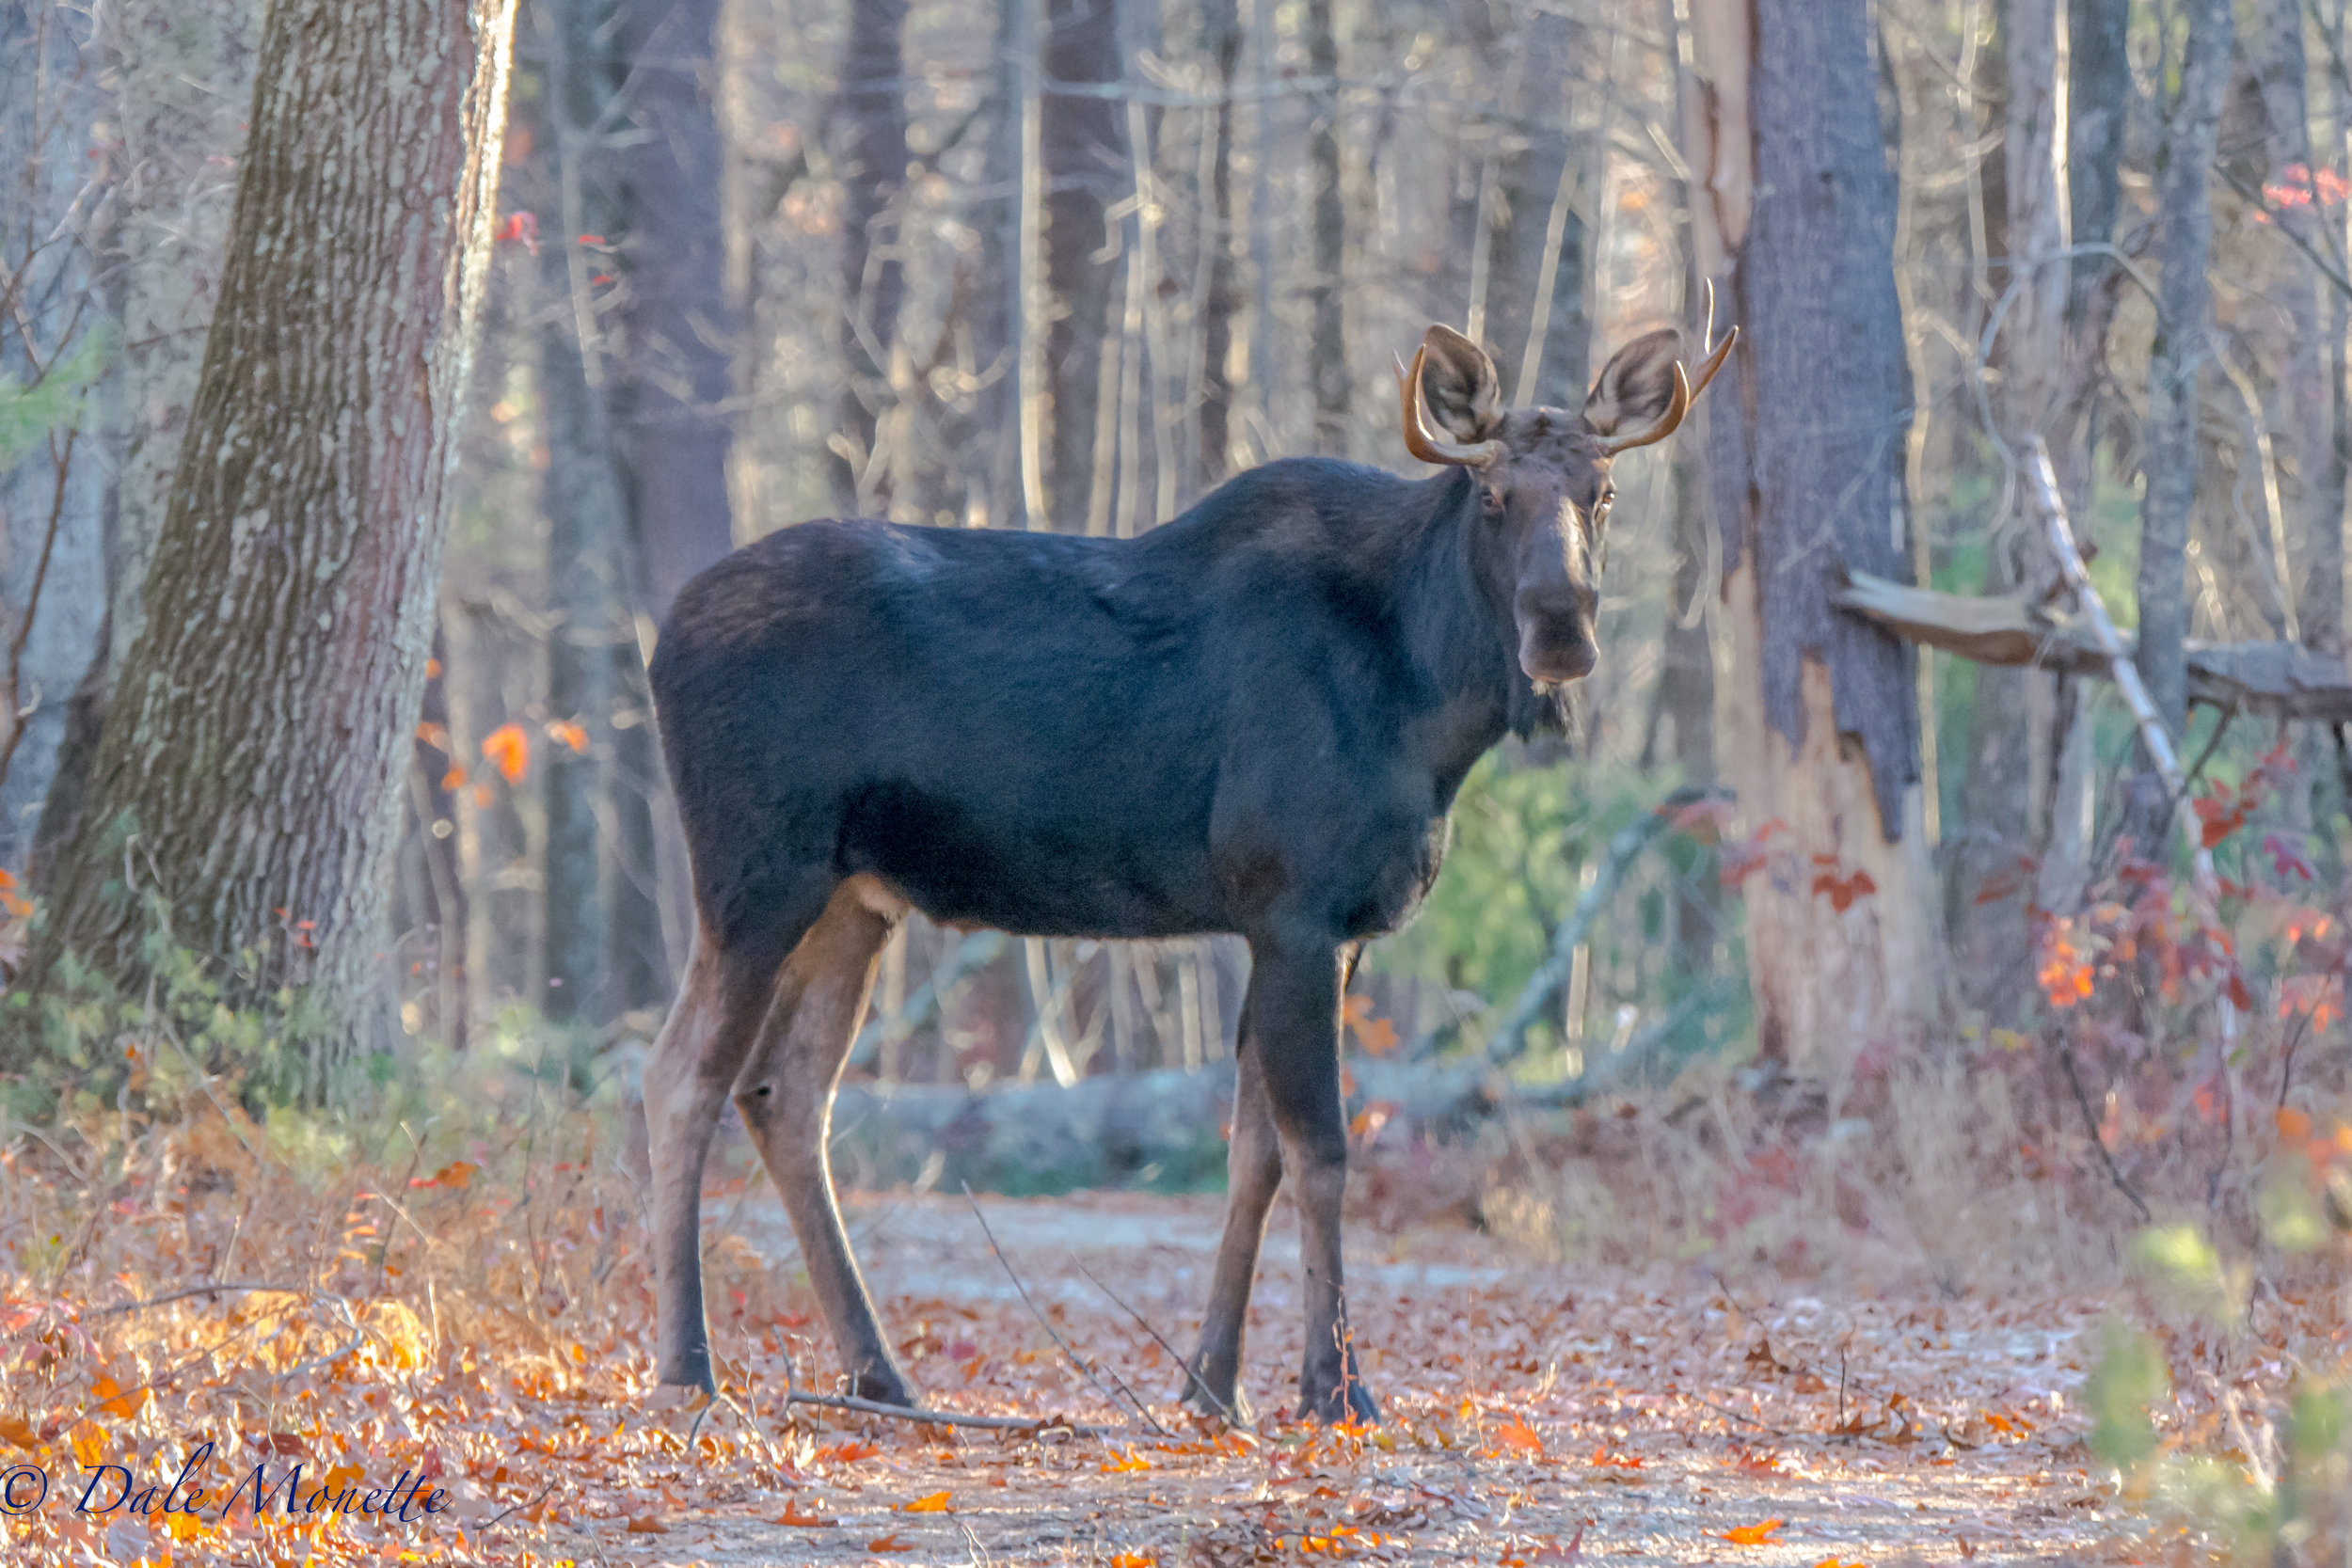    You never know whats going to appear at Quabbin !! I spotted this handsome guy standing off the trail in the woods watching me. I waited about 15 minutes just standing in the trail. He finally started wandering along thinking I was not a threat an